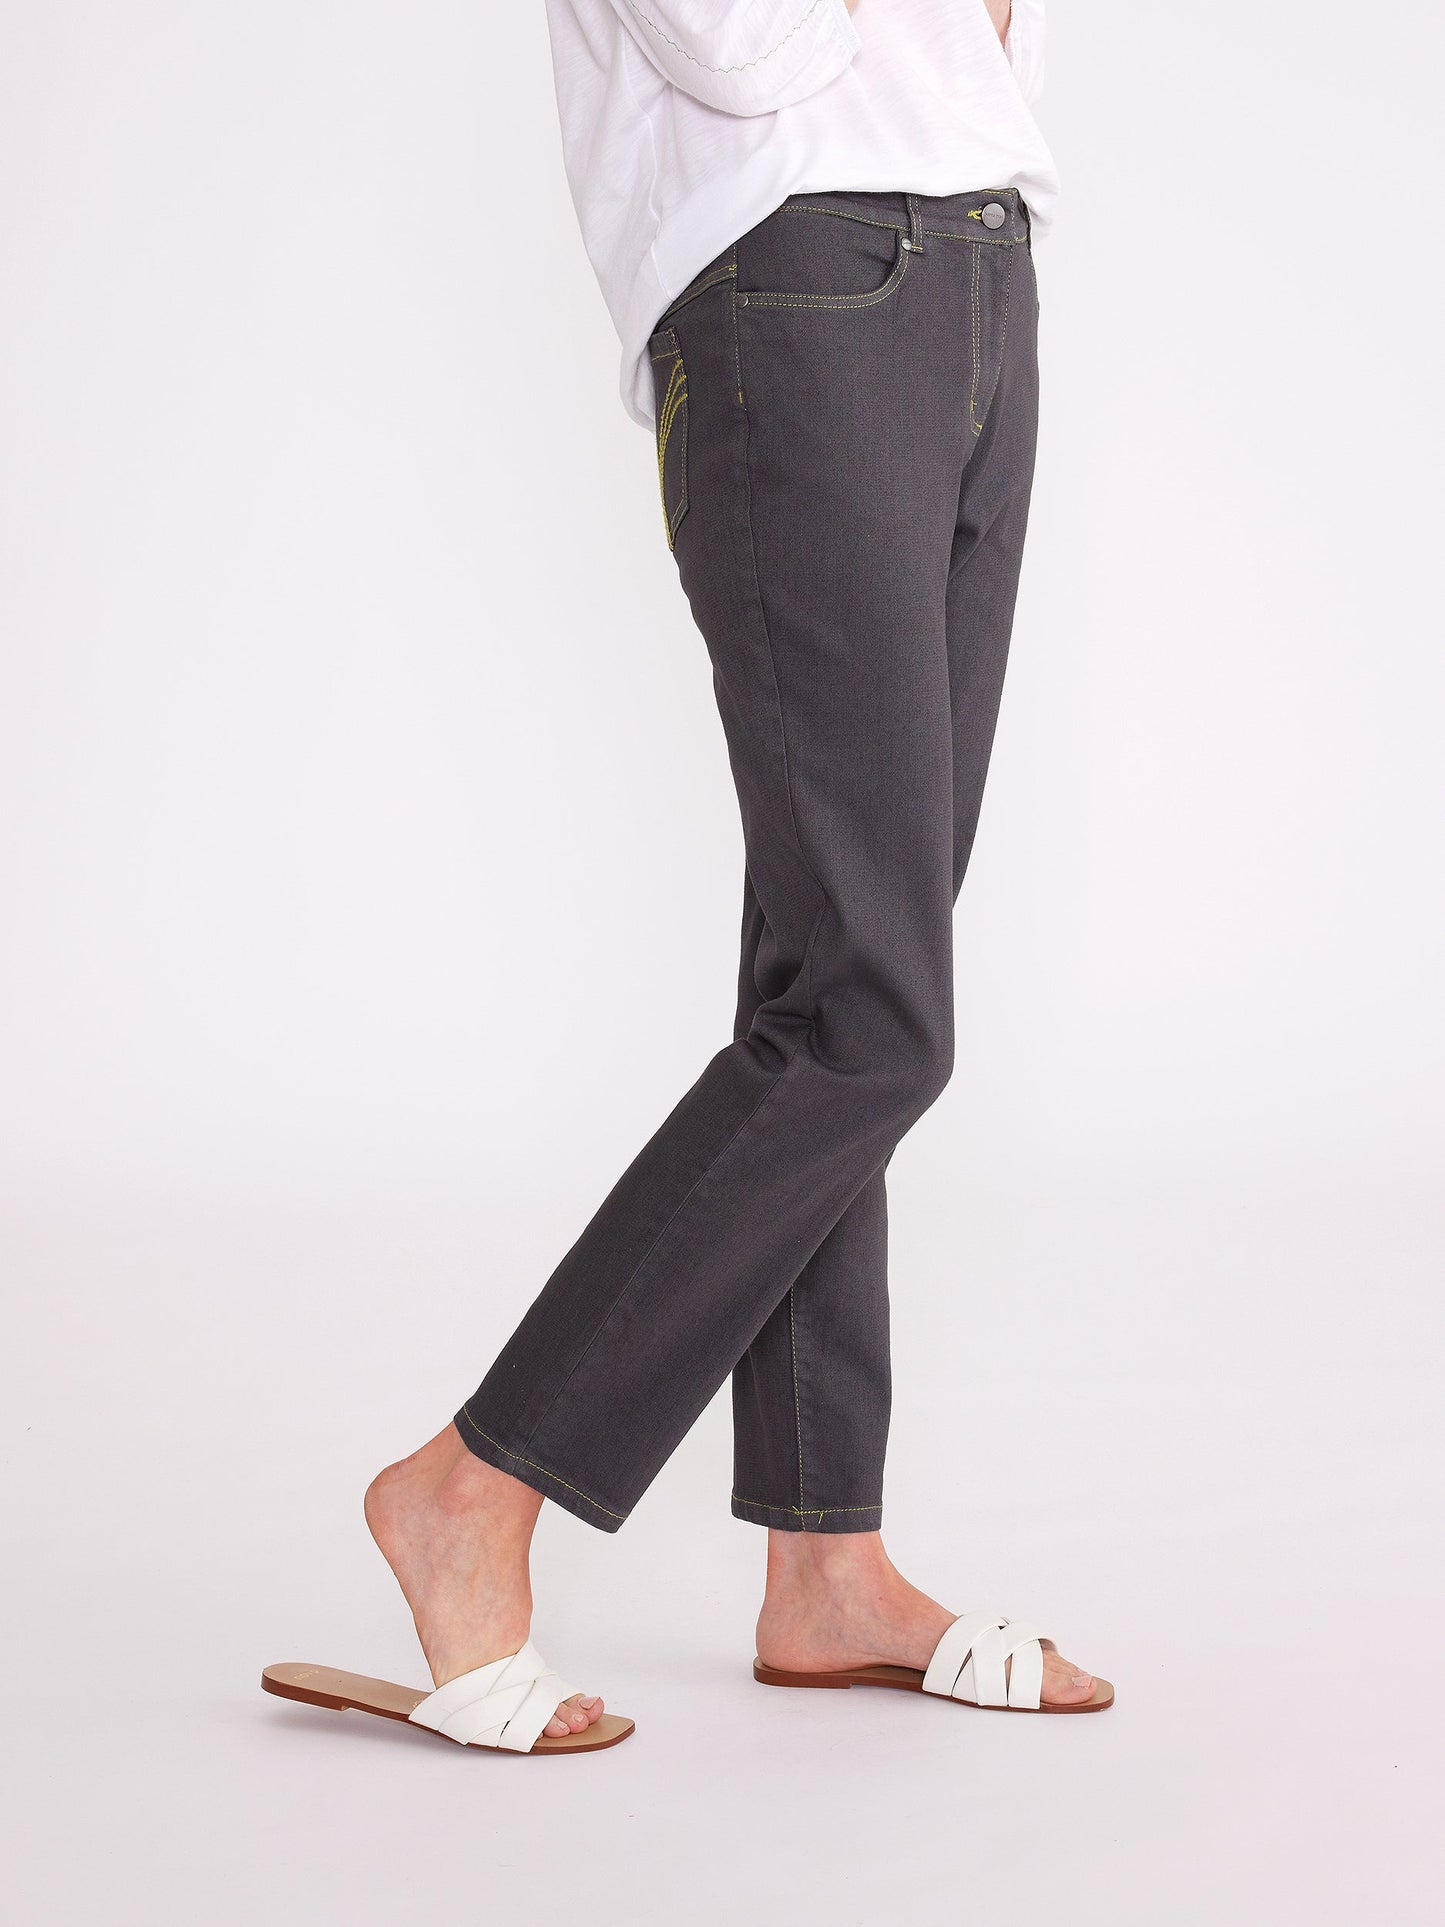 YARRA TRAIL CROPPED CHARCOAL JEAN - CHARCOAL - THE VOGUE STORE